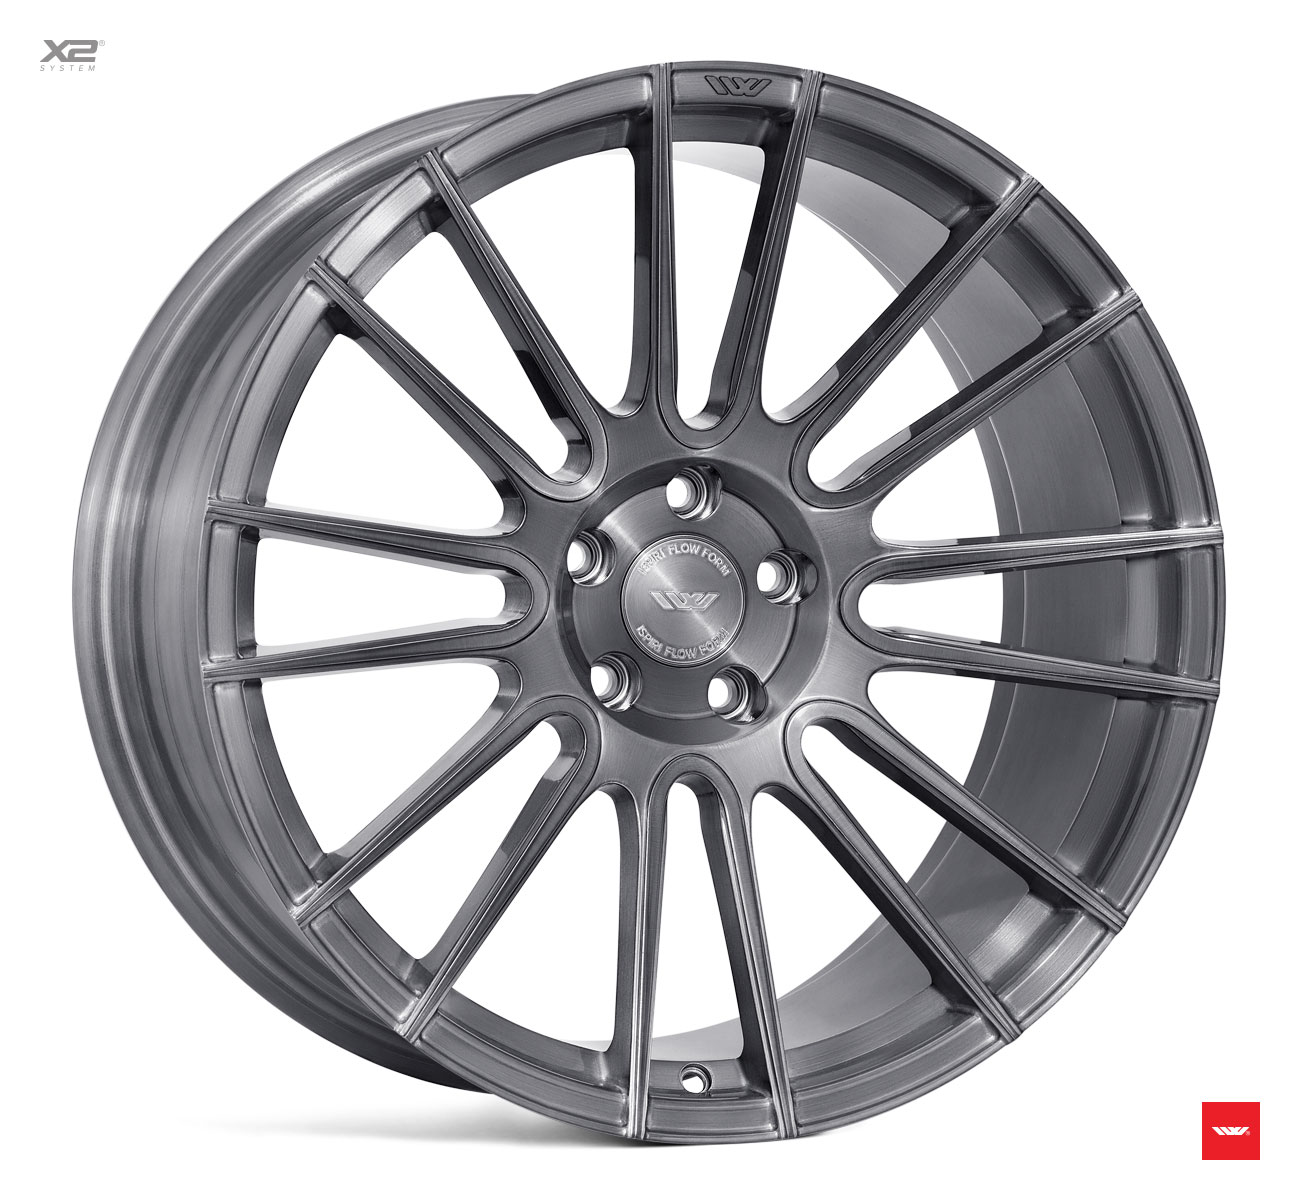 NEW 20" ISPIRI FFR8 8-TWIN CURVED SPOKE ALLOY WHEELS IN FULL BRUSHED CARBON TITANIUM, WIDER 10" REAR